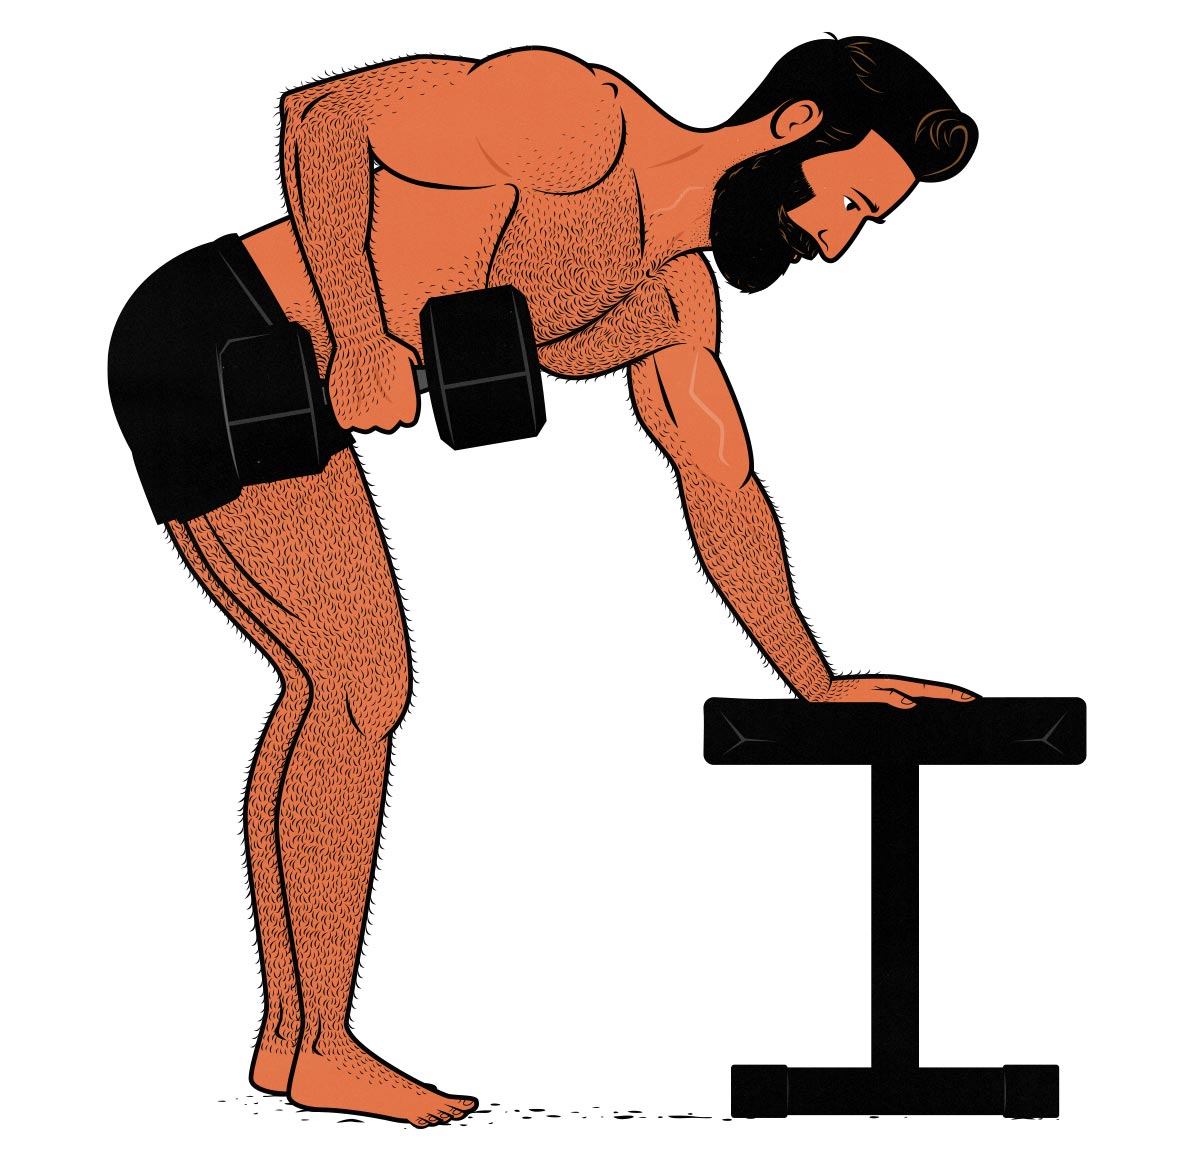 Illustration of a weight lifter doing dumbbell rows to bulk up his back muscles.